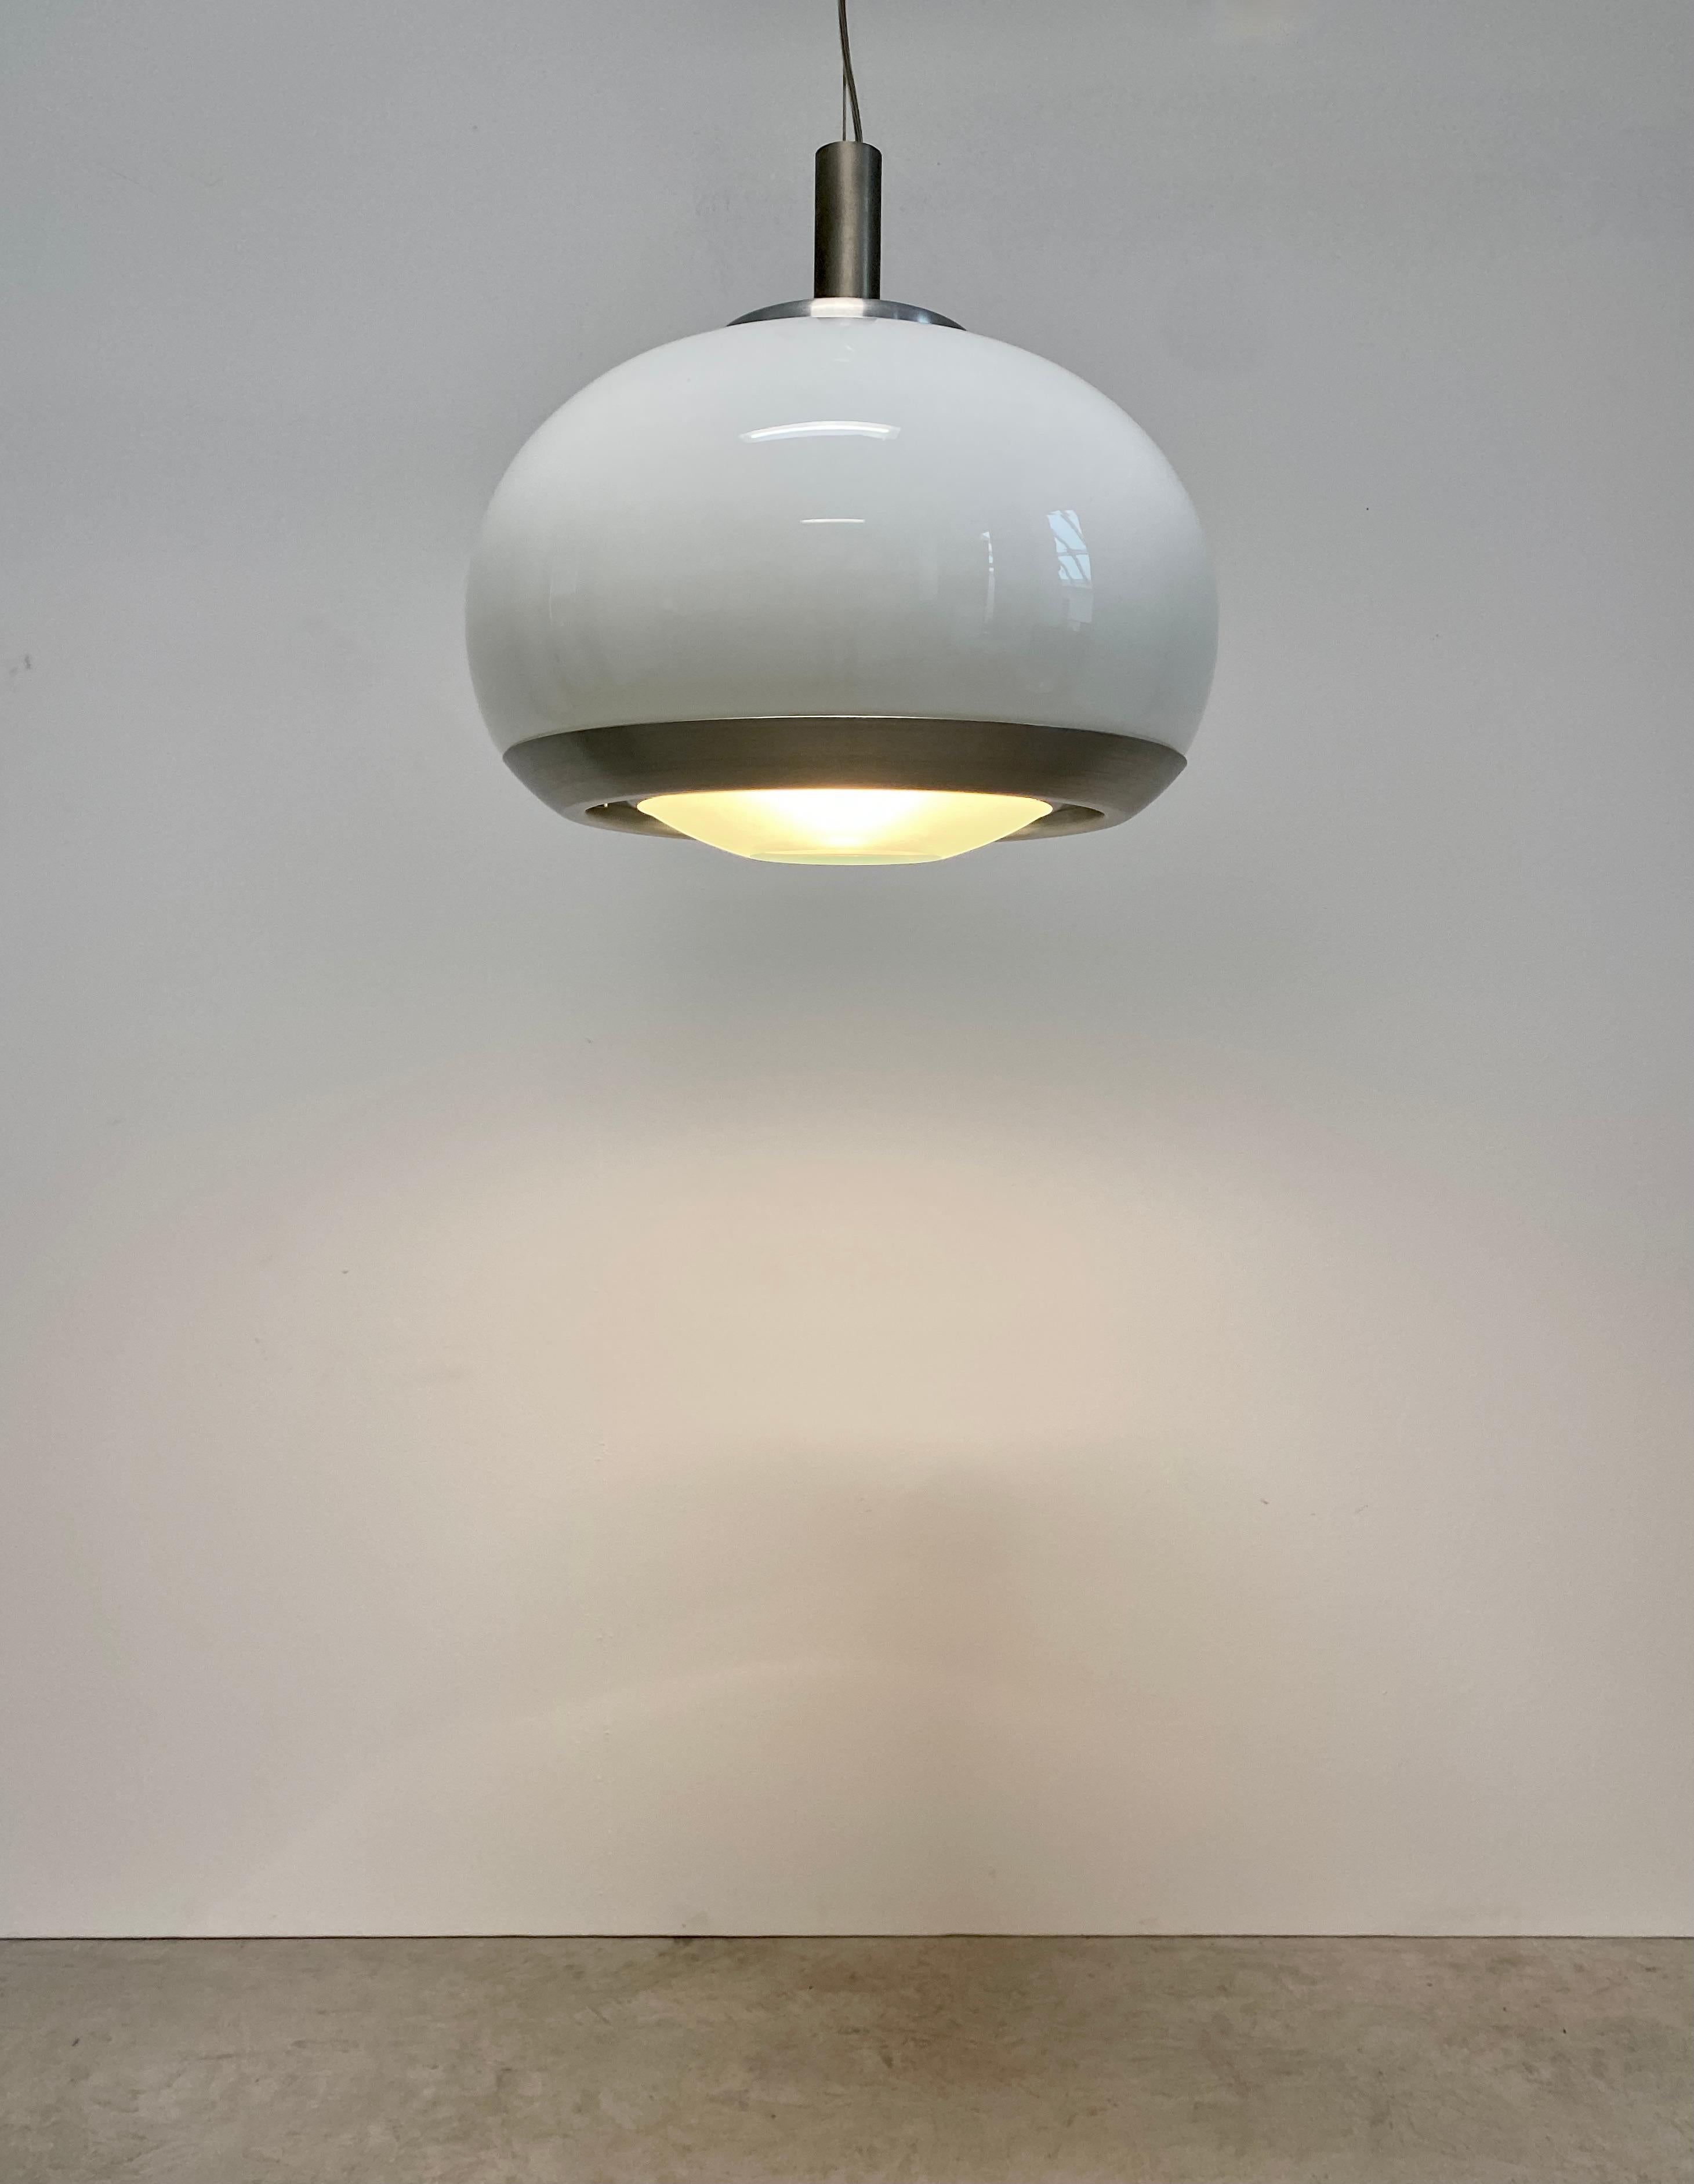 translucent optical opal and clear glass pendant lamp glass, circa 1975

Italian pendant light with a cut clear glass shade. The white opal up-light shade is also made from glass. Aluminum hardware. It takes 1x e27/26 Edison light bulb with 100W